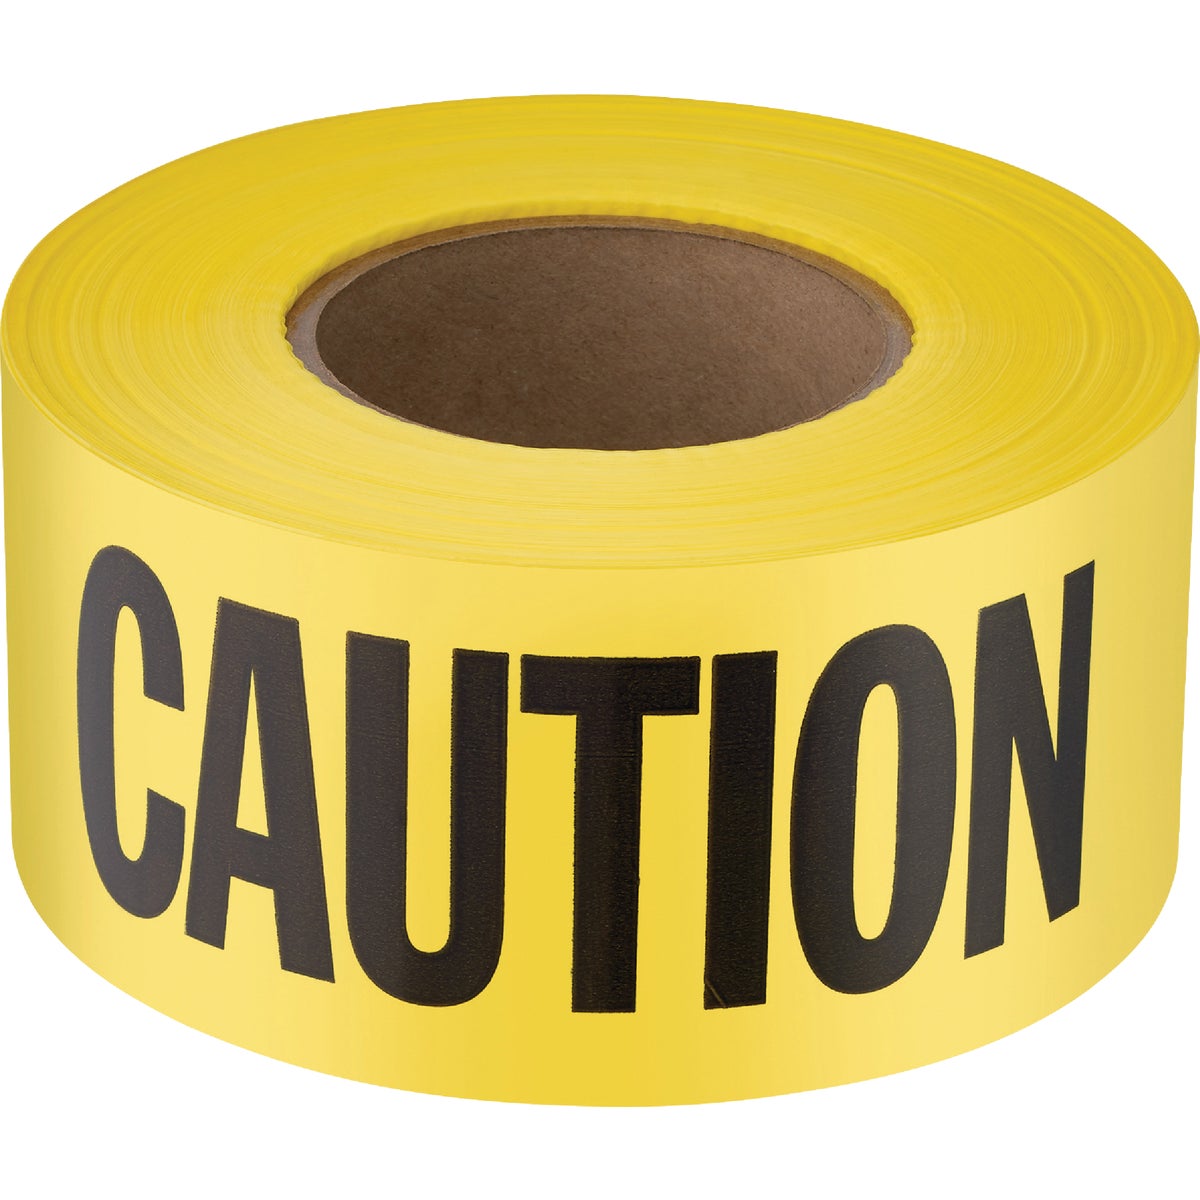 Empire 3 In. W x 1000 Ft. L Standard Caution Tape